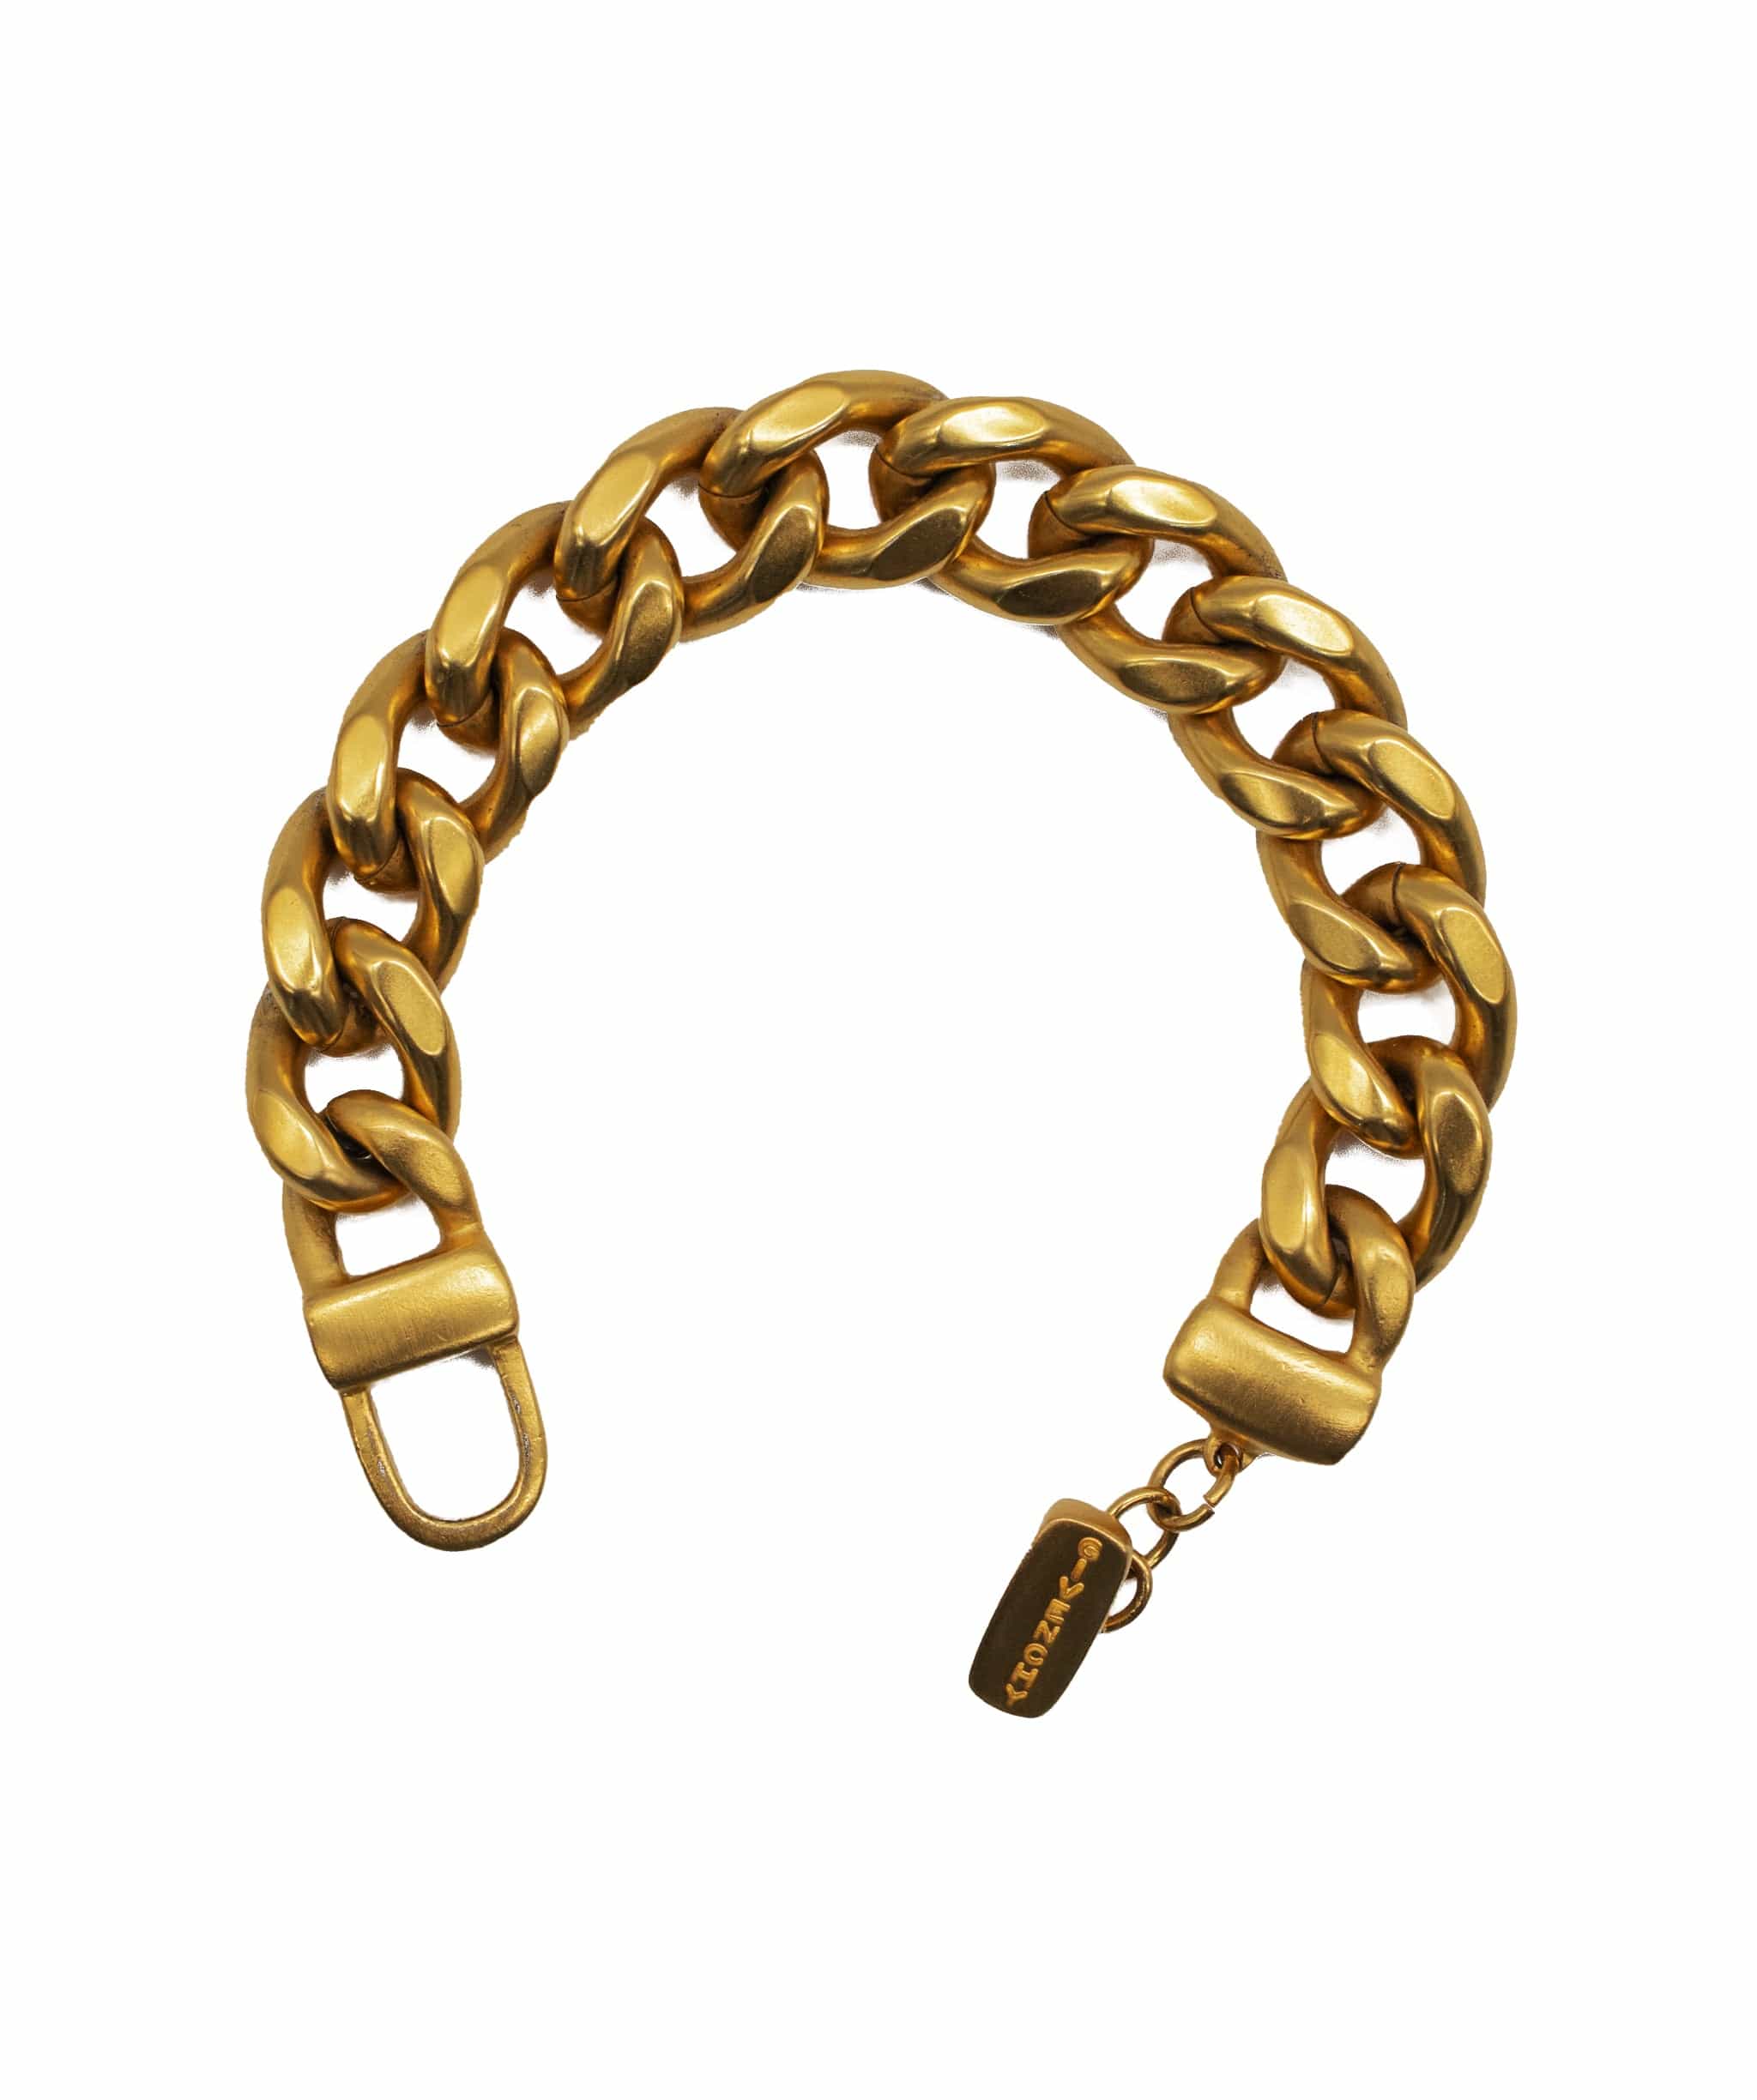 Givenchy Vintage Givenchy Chunky Chain Bracelet 1980s AEL1010